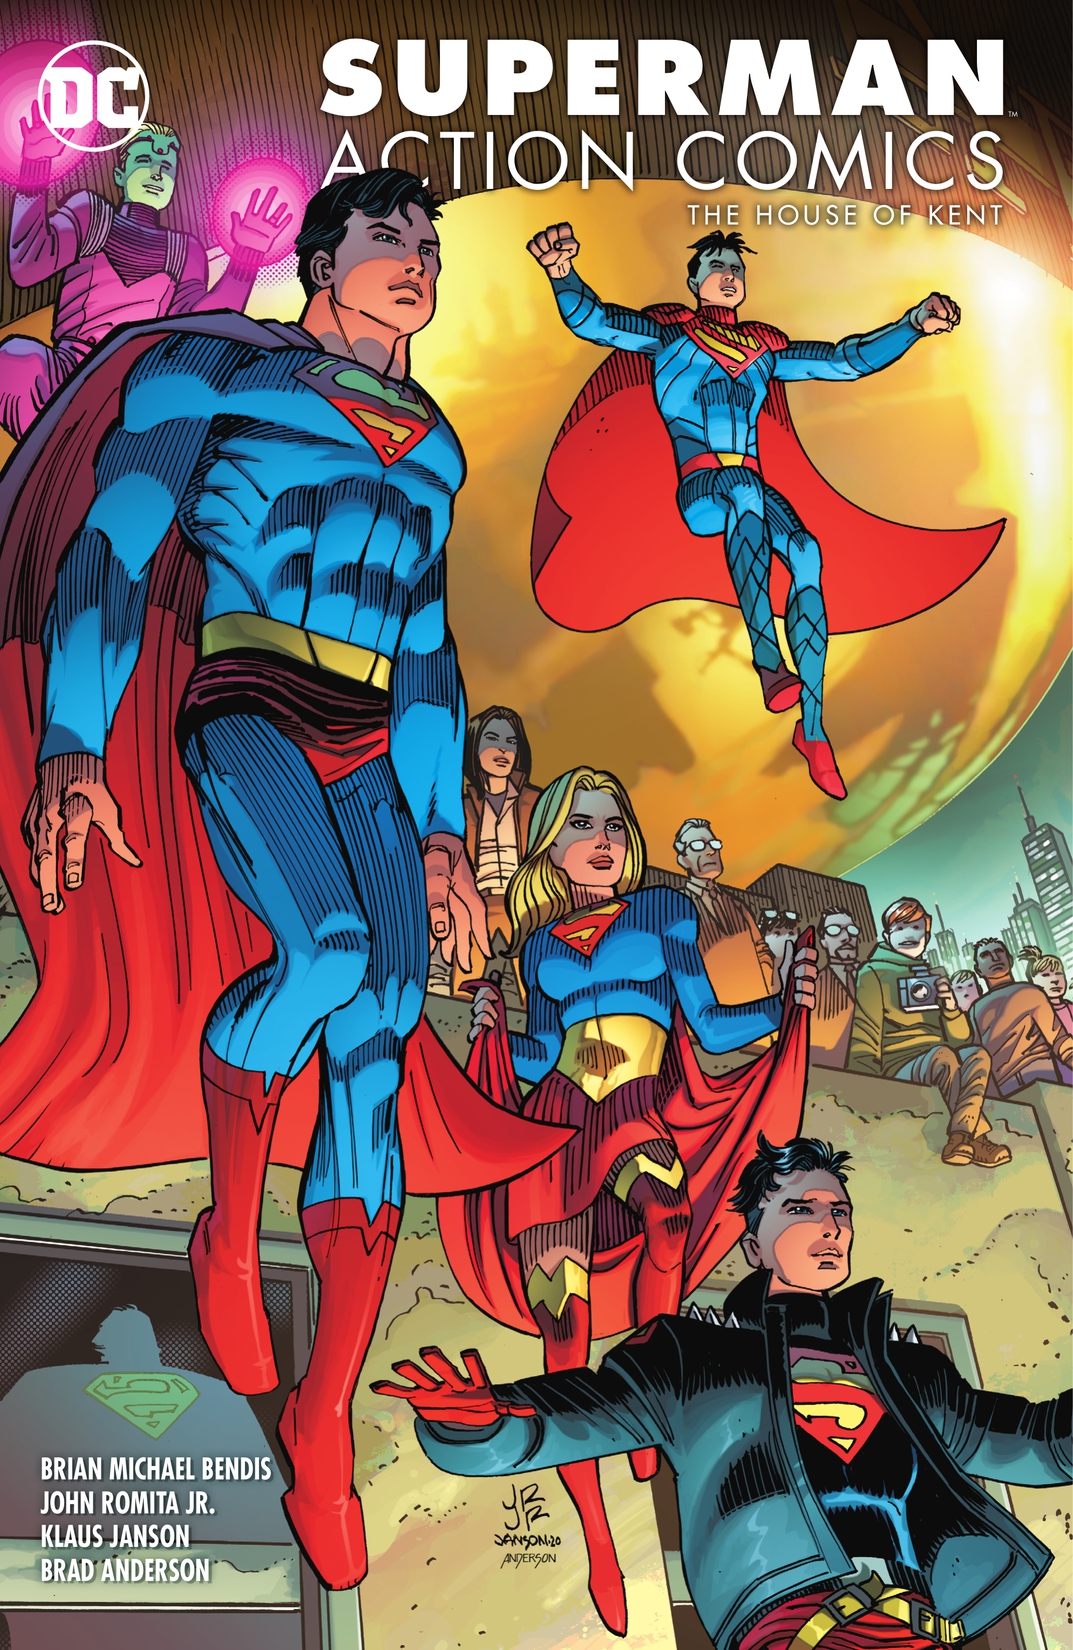 Superman: Action Comics Volume 5: The House of Kent preview images